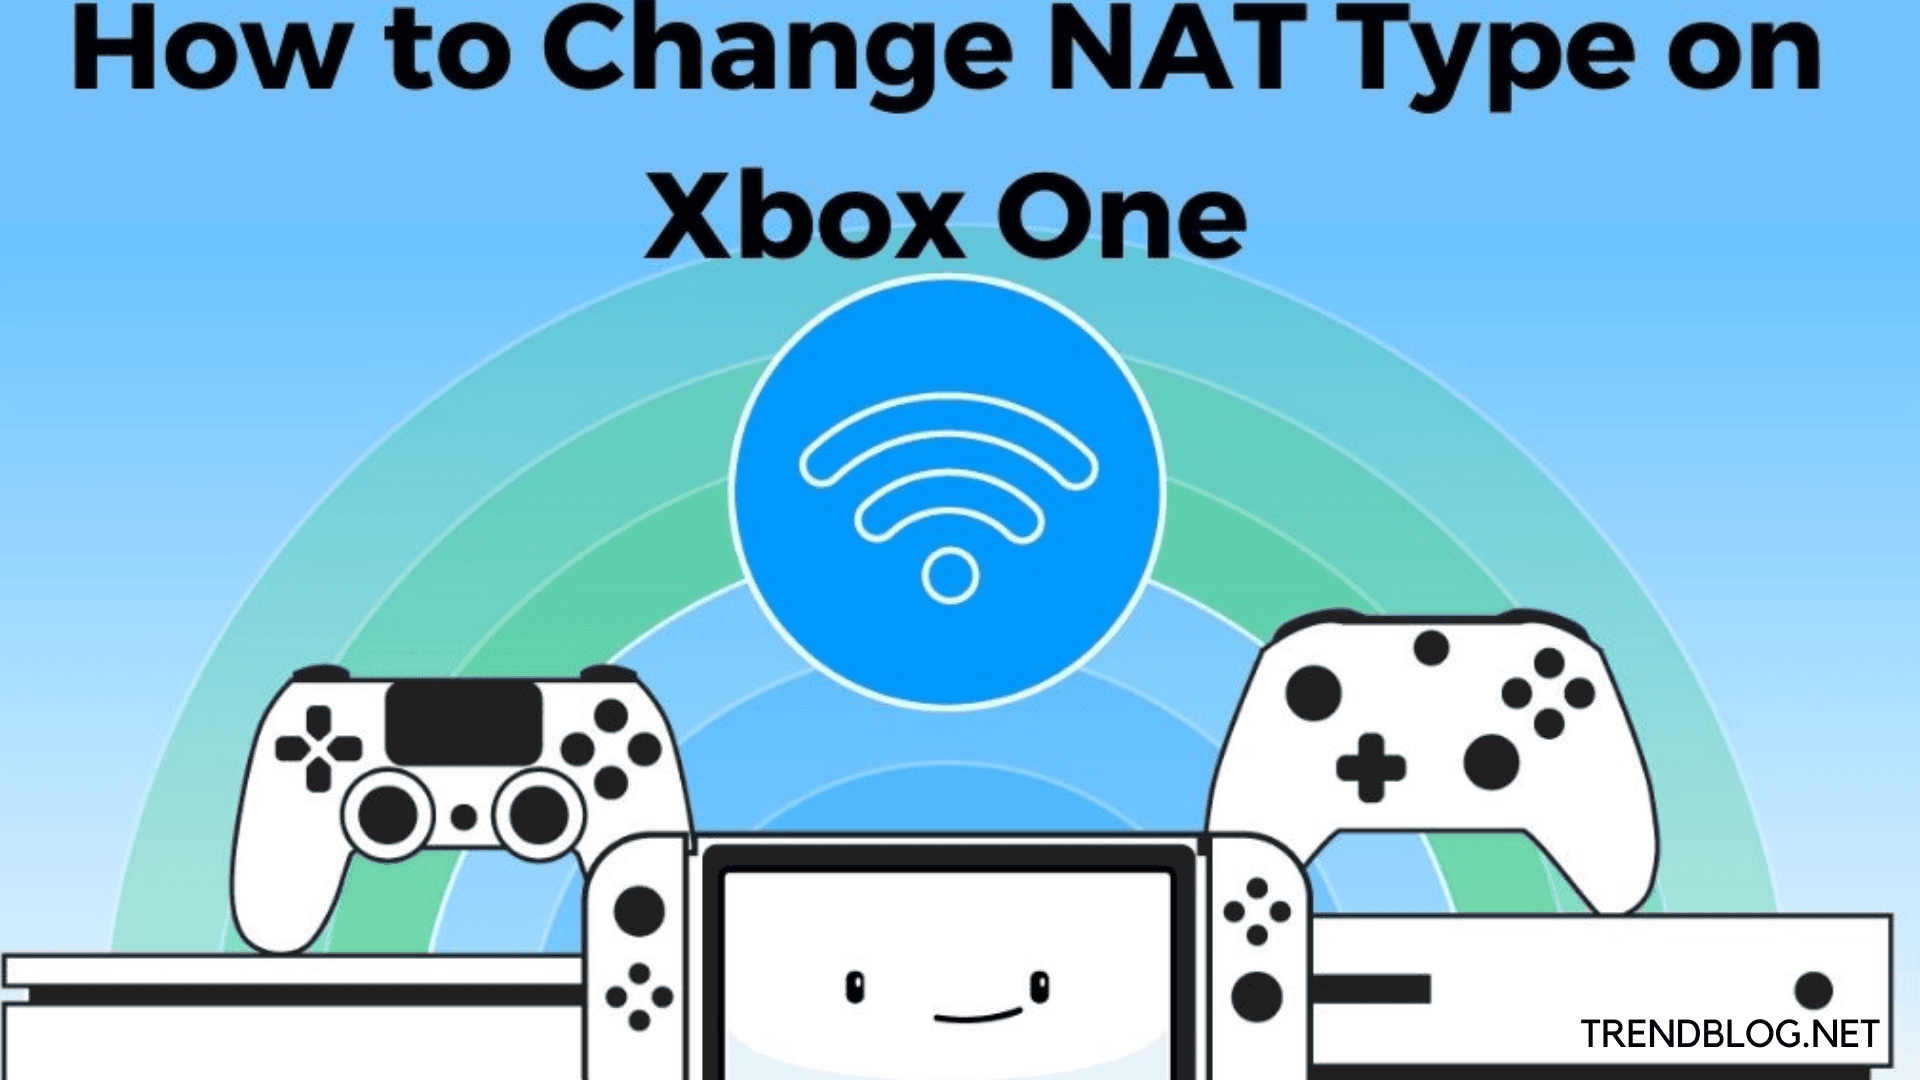  Hacks to Fix Nat Type Unavailable on Xbox One